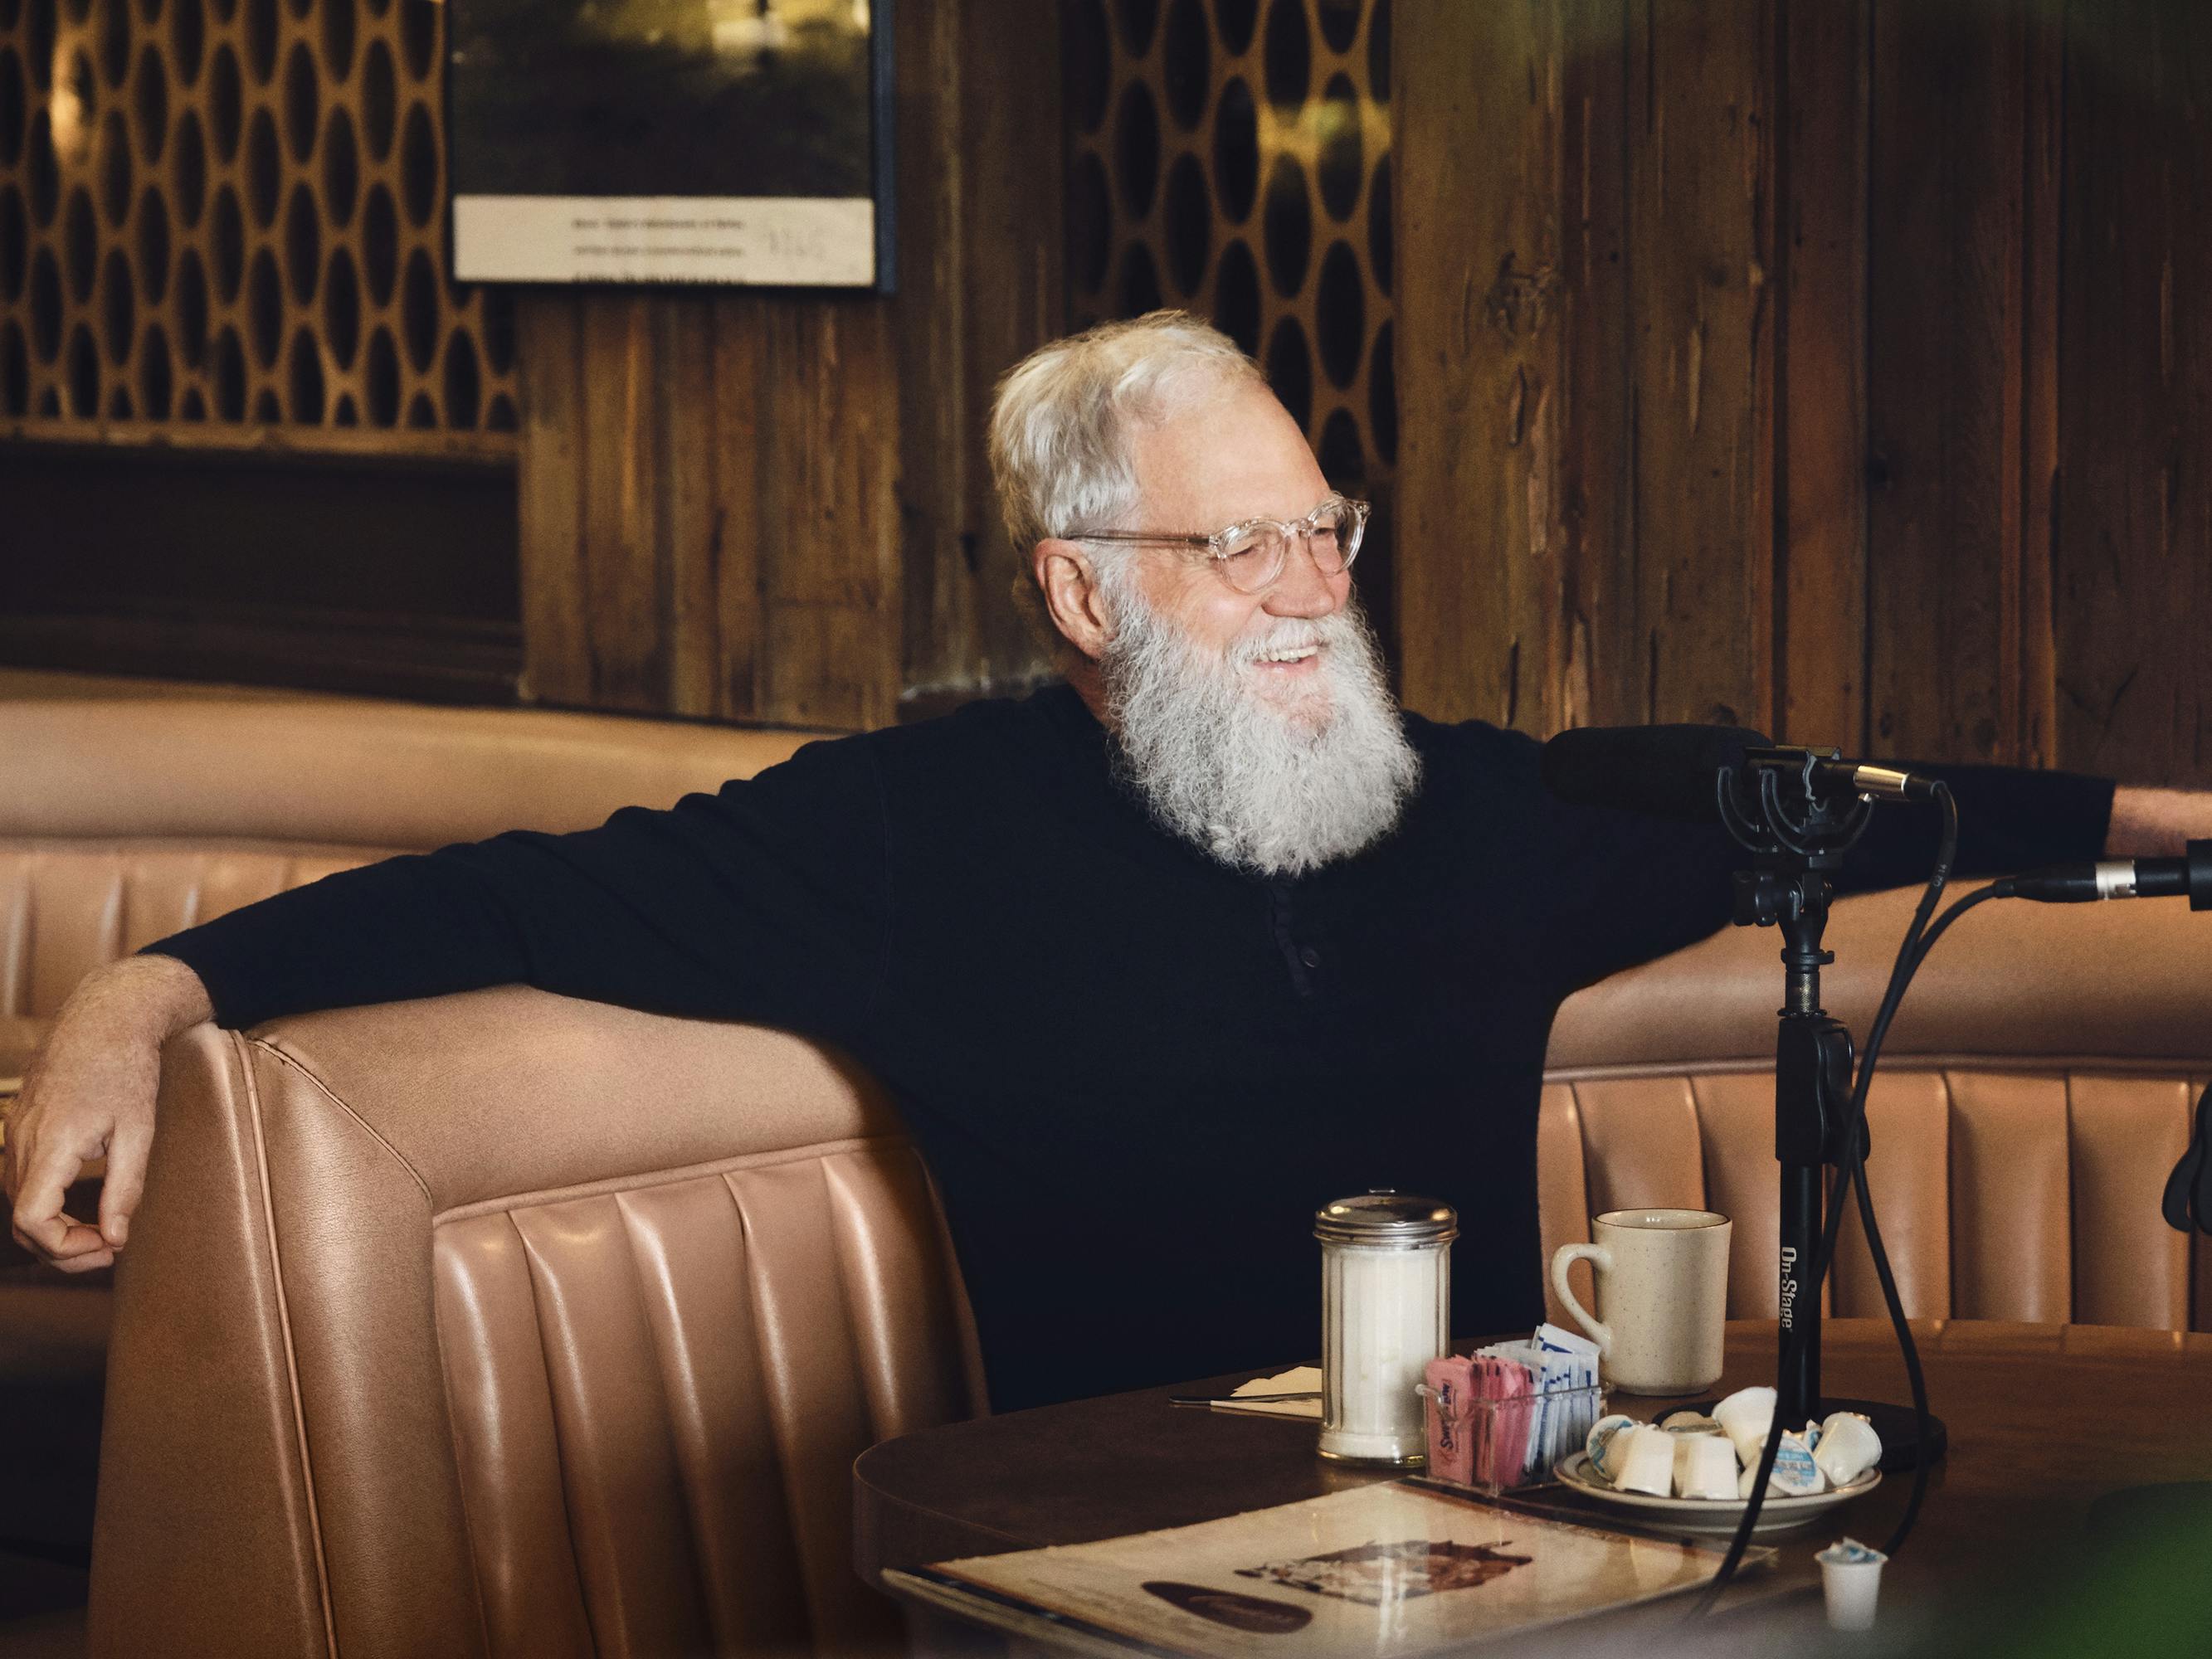 David Letterman wears a dark sweater and sits in a brown leather booth.